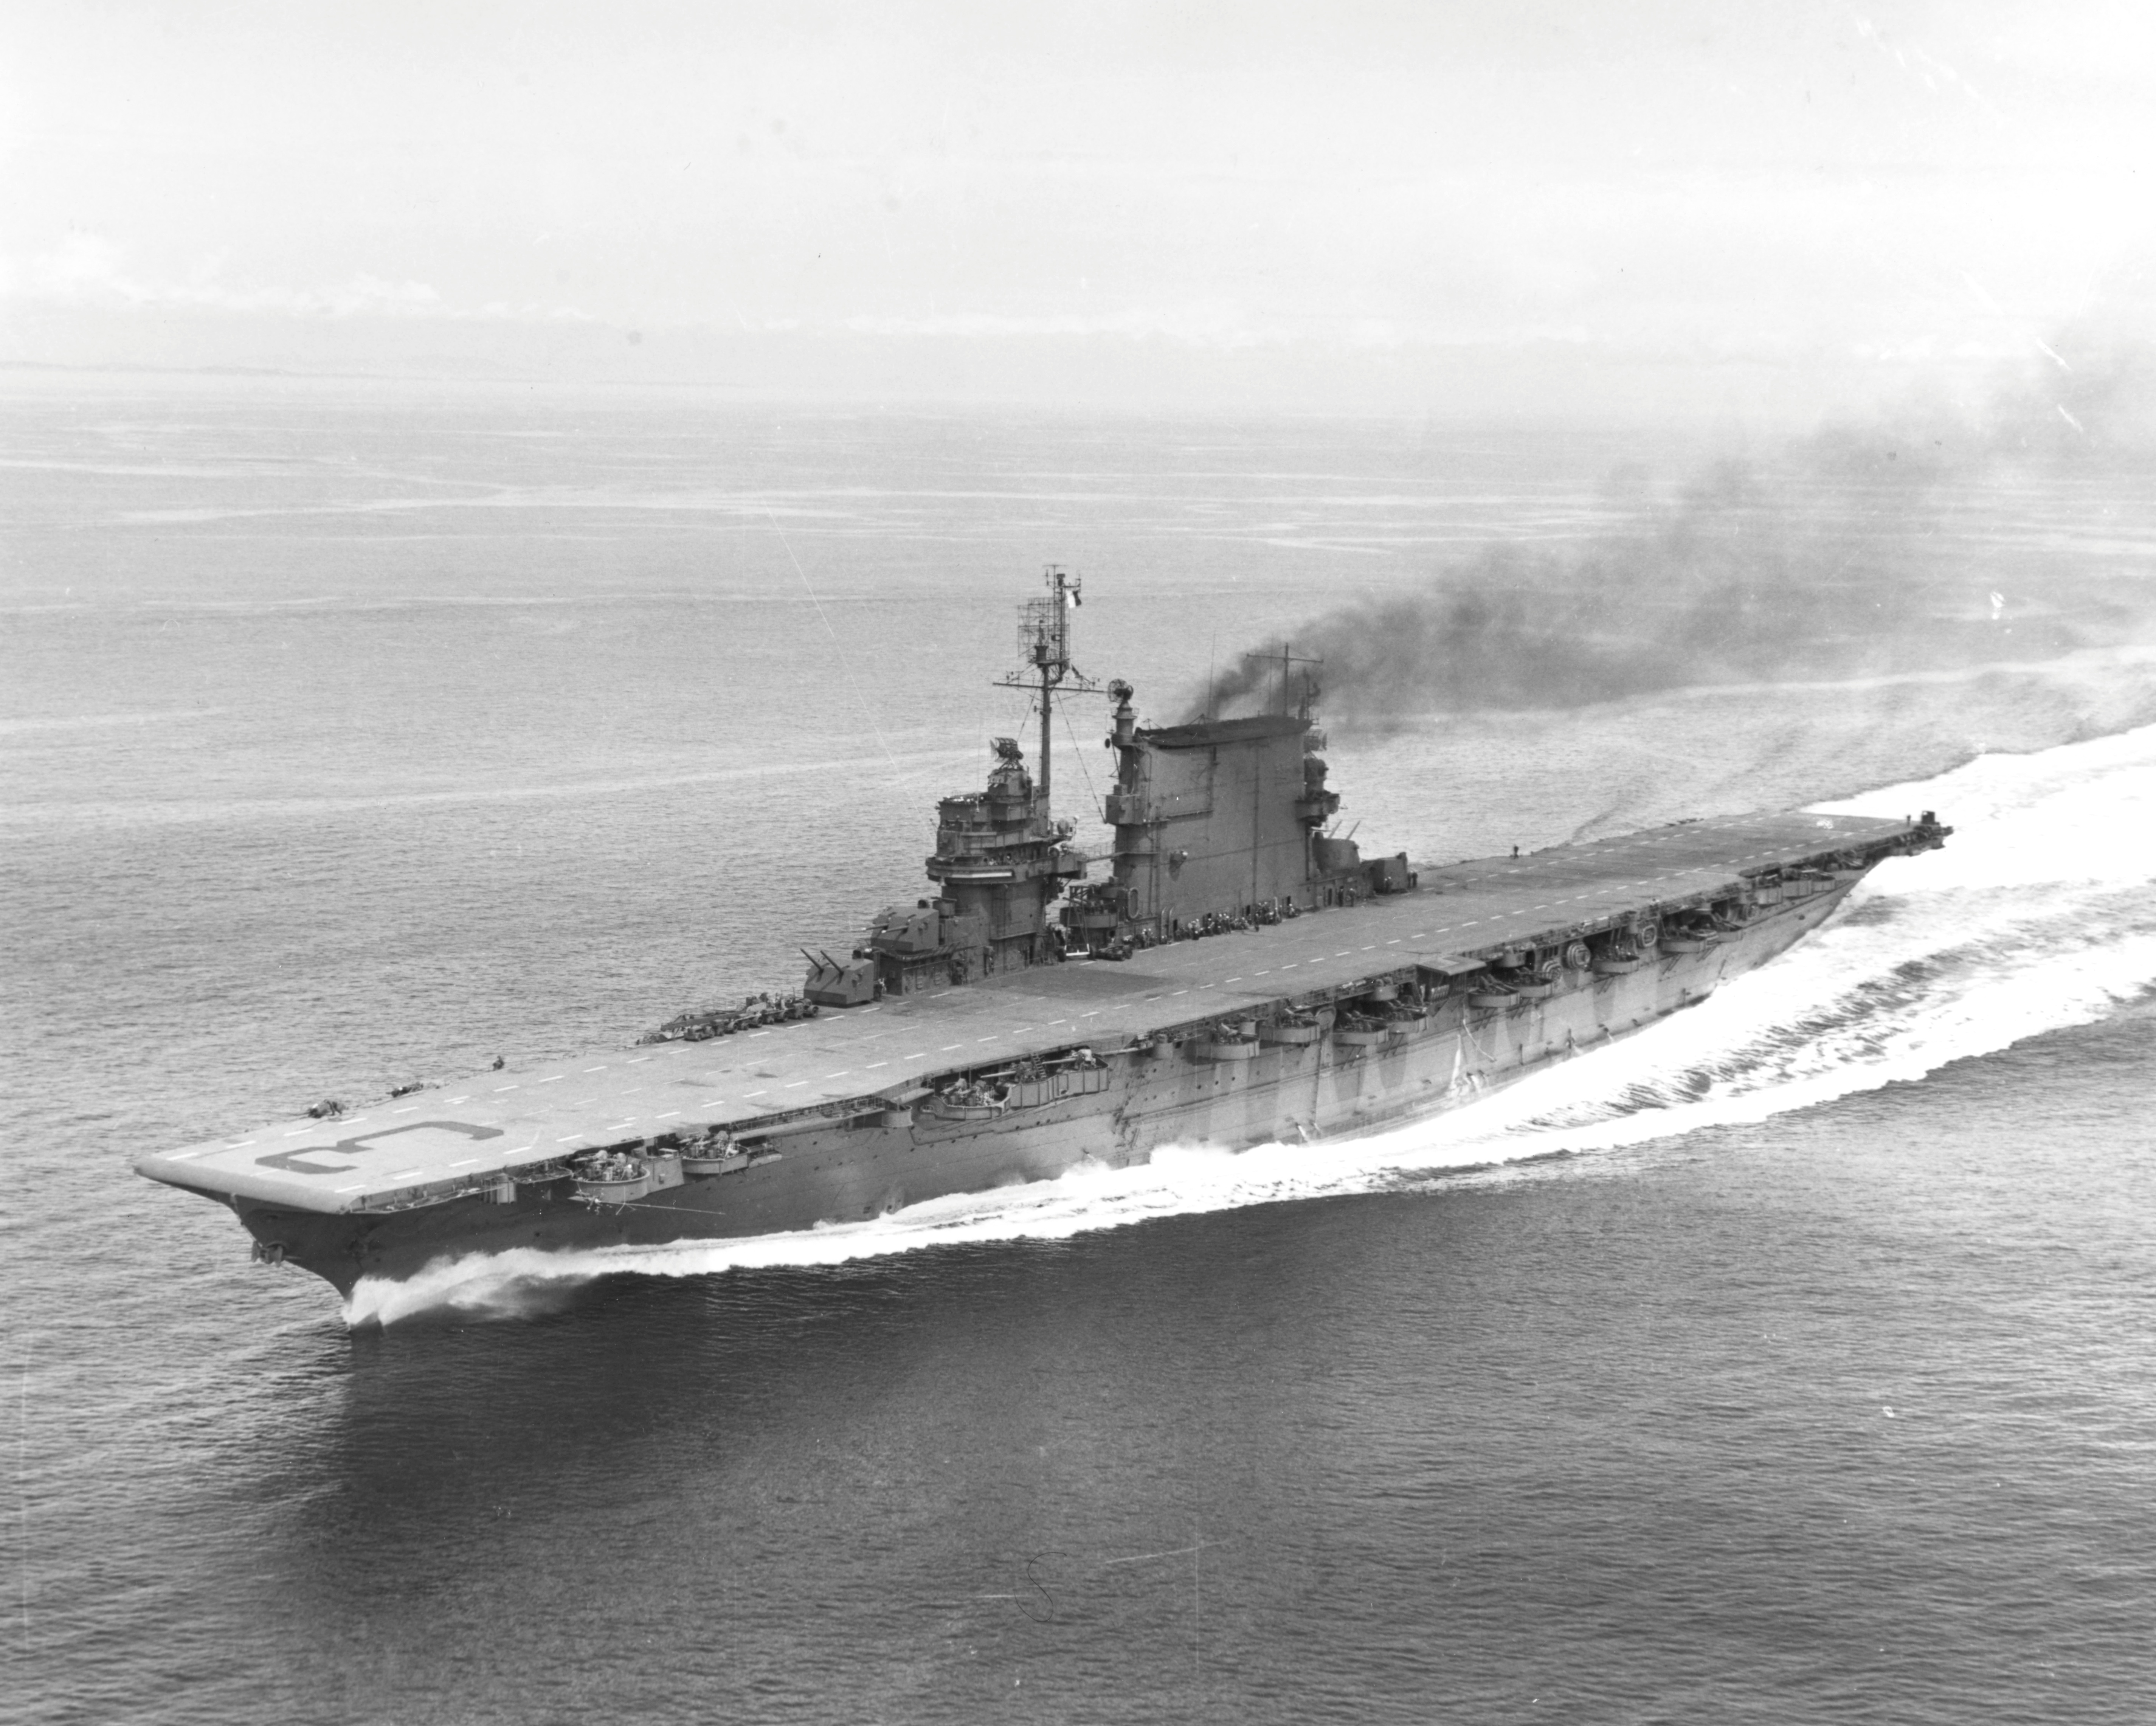 Saratoga running full power trials in Puget Sound, Washington, United States, following battle damage repairs, 15 May 1945. Photo 1 of 2.